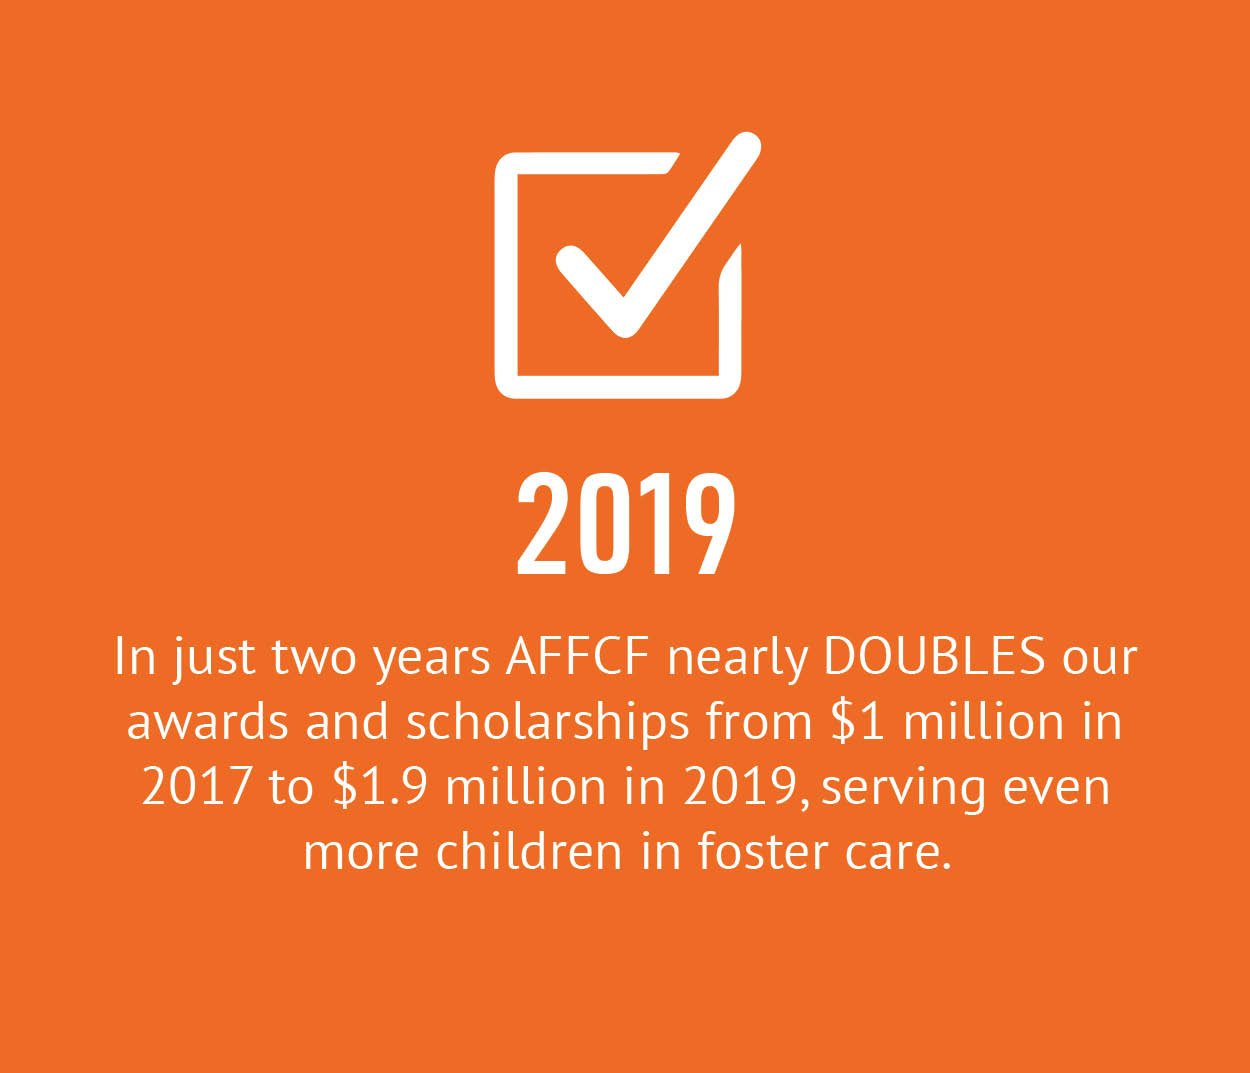 2019 - In just two years AFFCF nearly DOUBLES our awards and scholarships from $1 million in 2017 to $1.9 million in 2019, serving even more children in foster care.